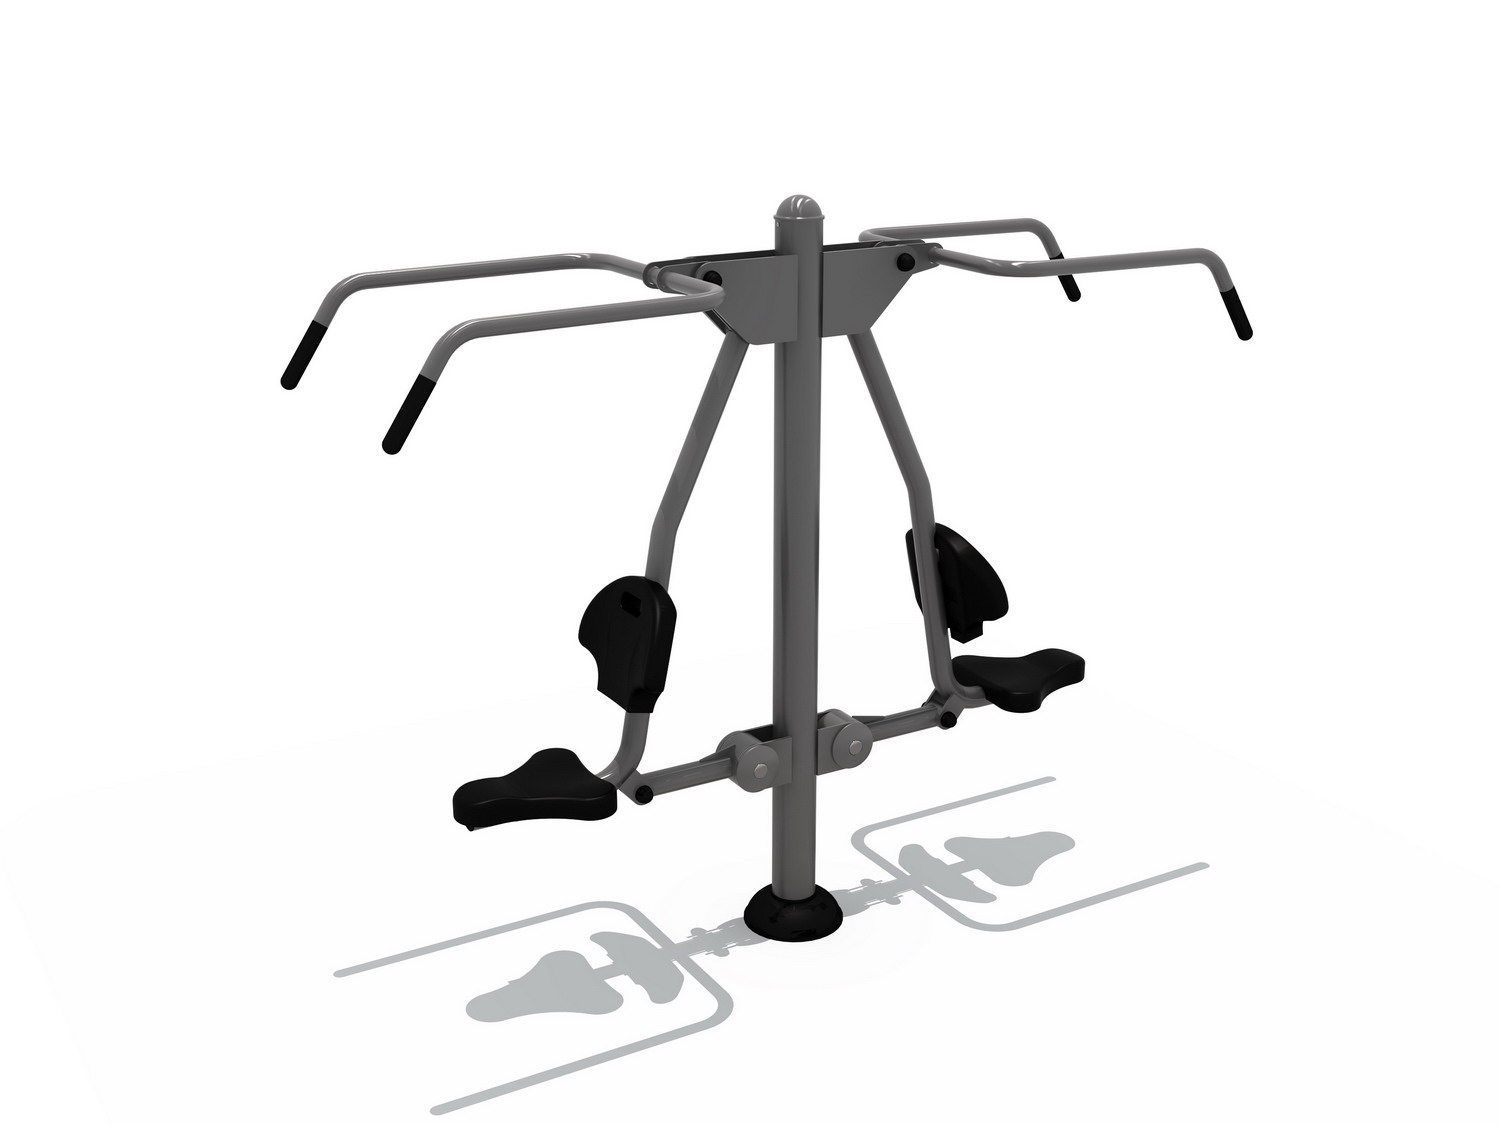 WFT-011 Lat Pull Down